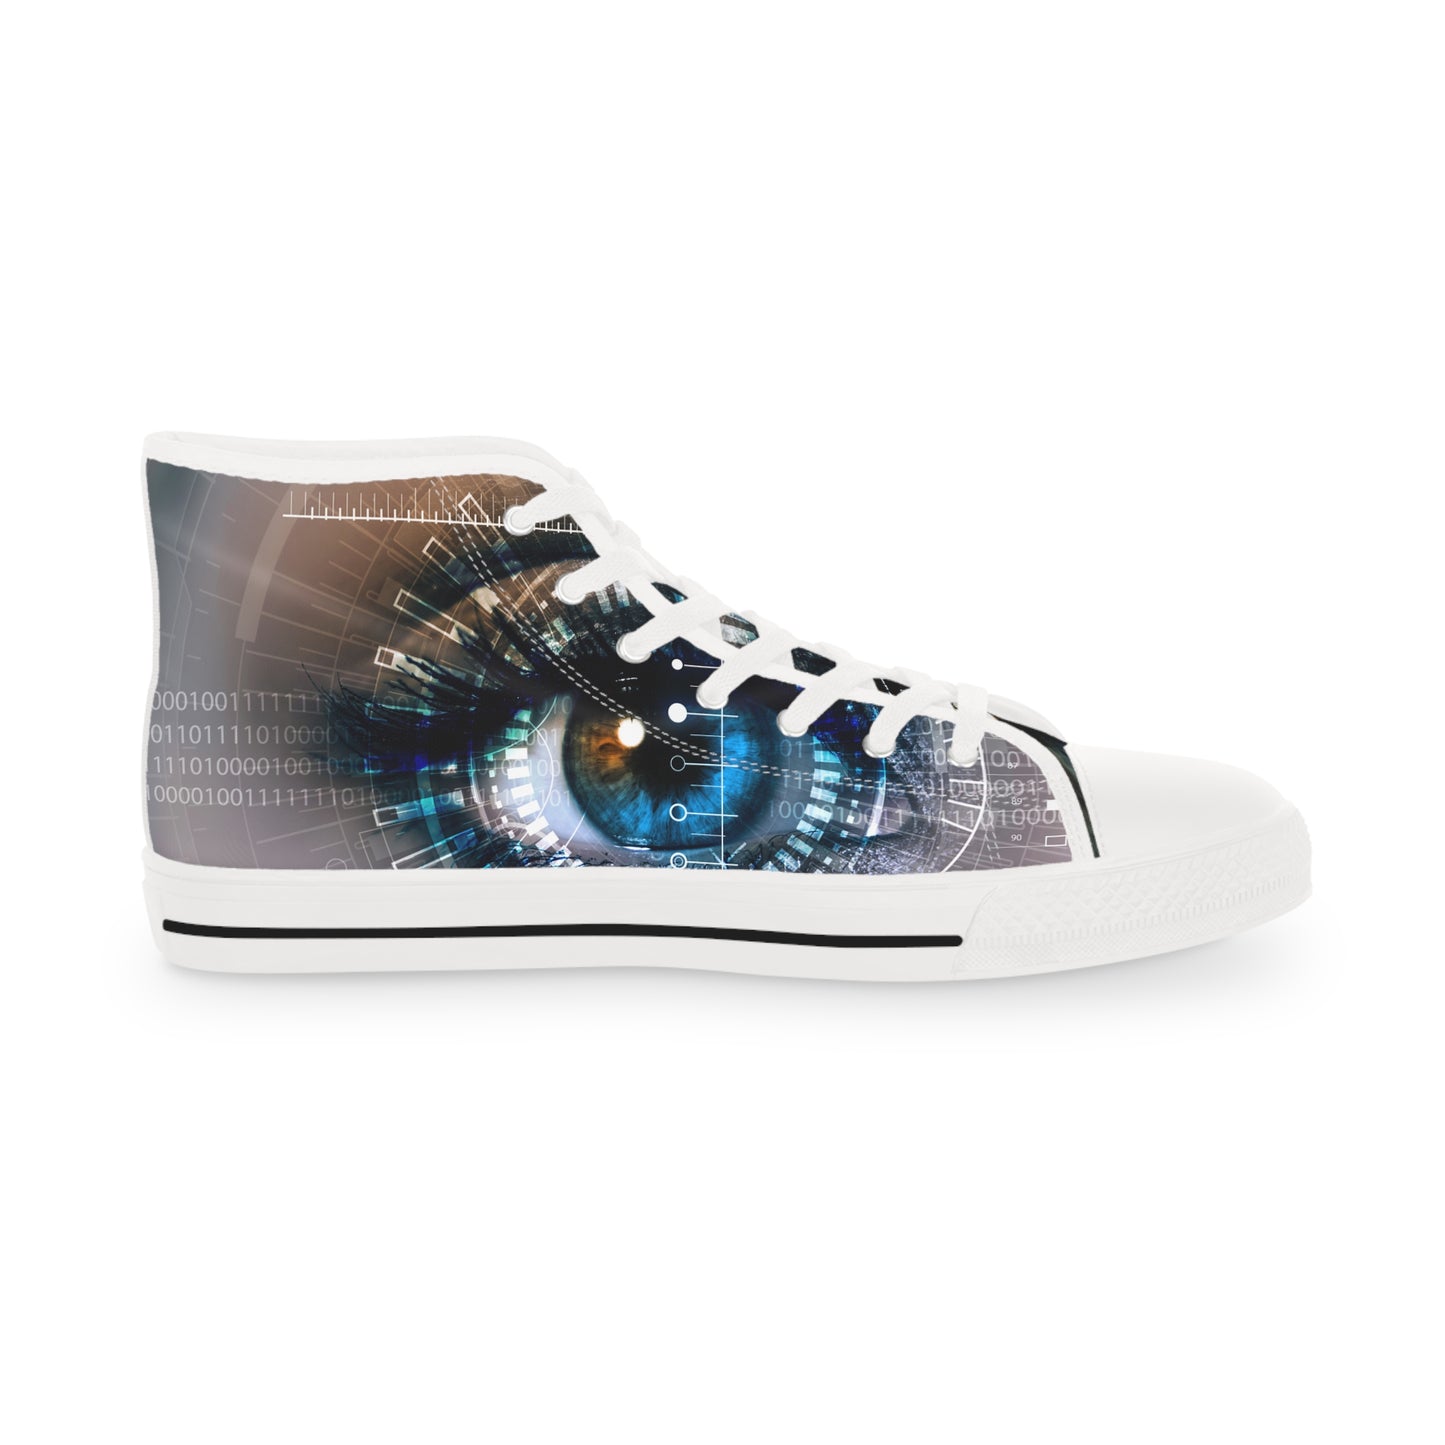 Limited Edition High Top Sneakers - Limited Data